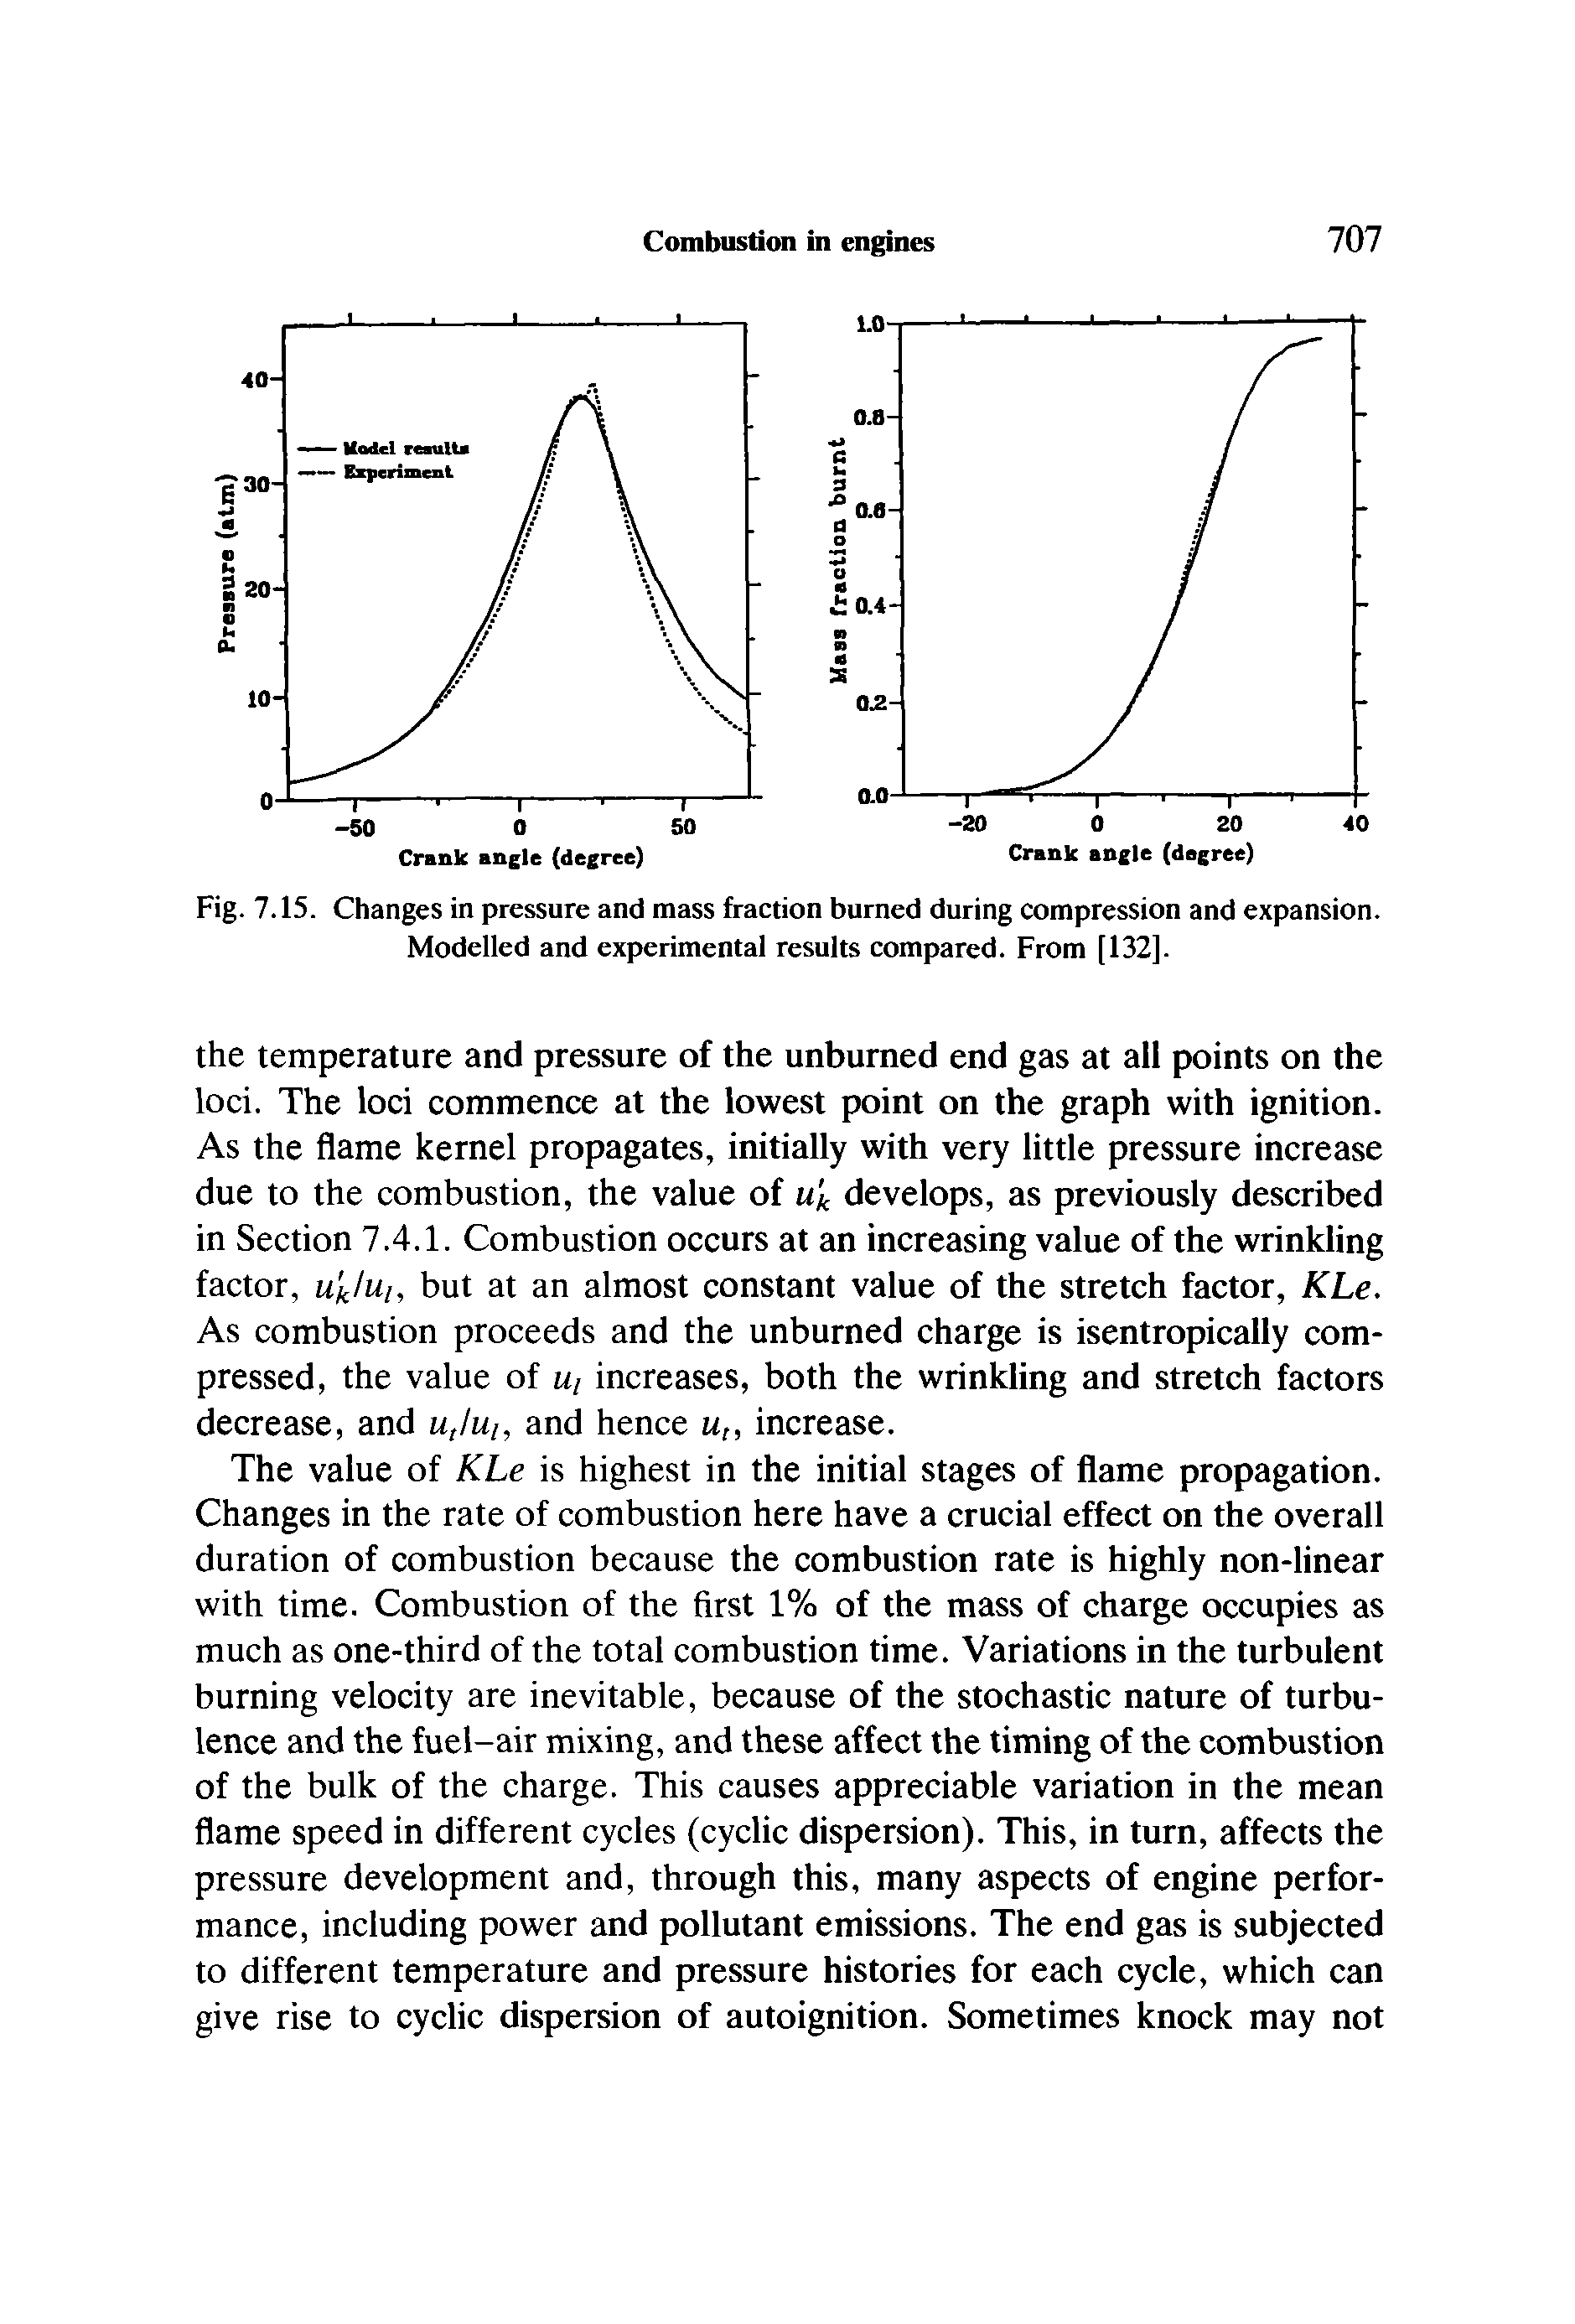 Fig. 7.15. Changes in pressure and mass fraction burned during compression and expansion. Modelled and experimental results compared. From [132].